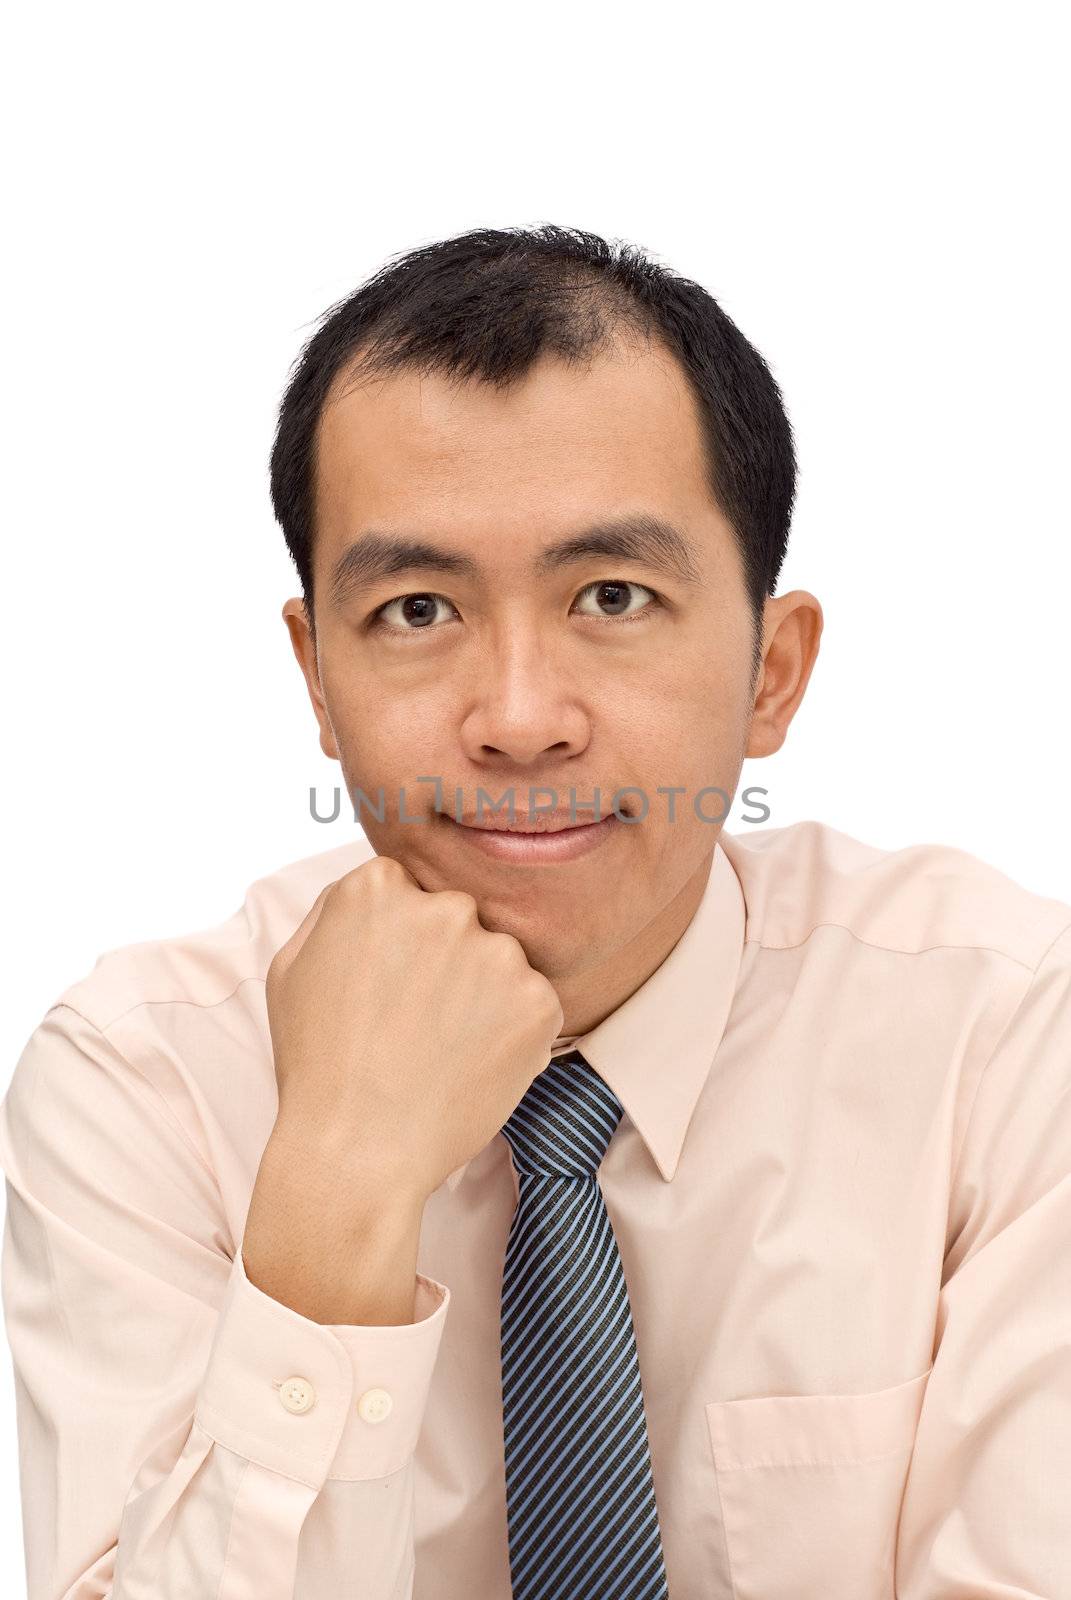 Mature businessman portrait of Asian with thinking expression on white background.